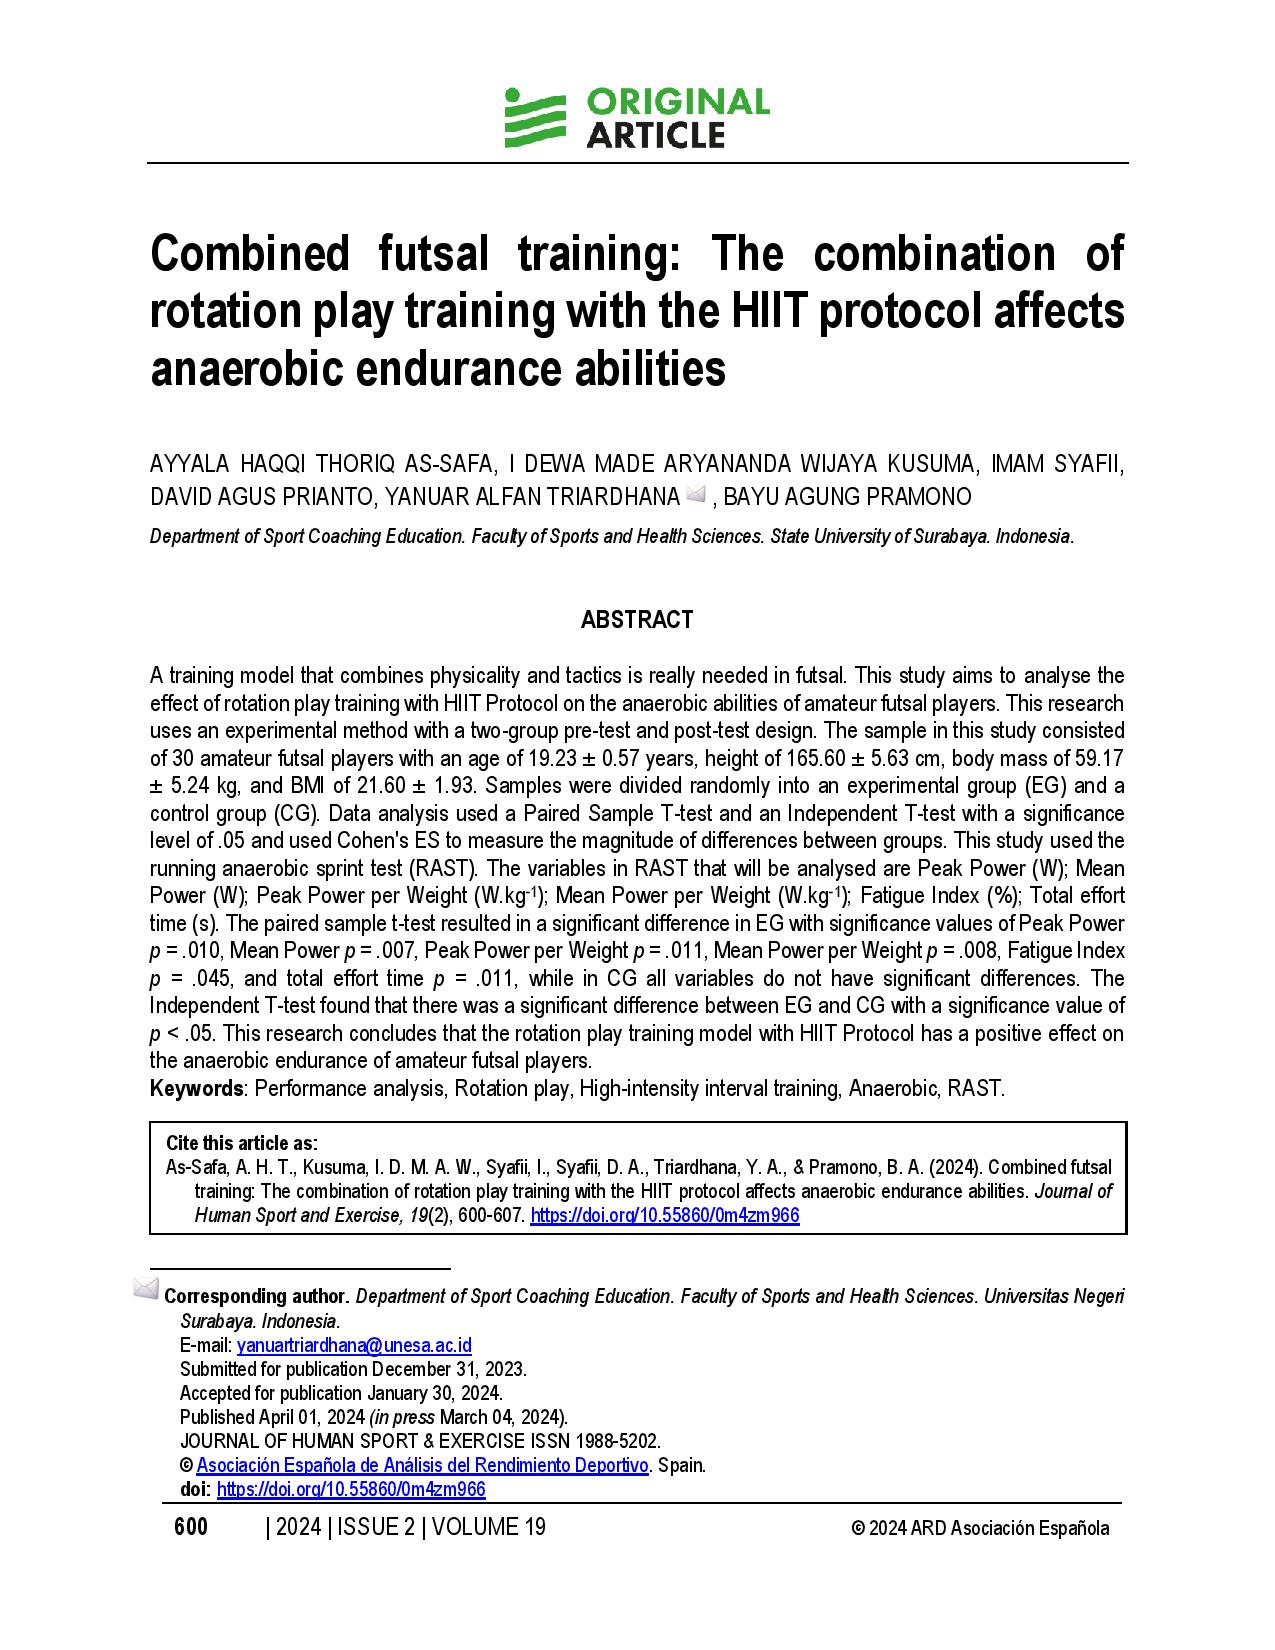 Combined futsal training: The combination of rotation play training with the HIIT protocol affects anaerobic endurance abilities